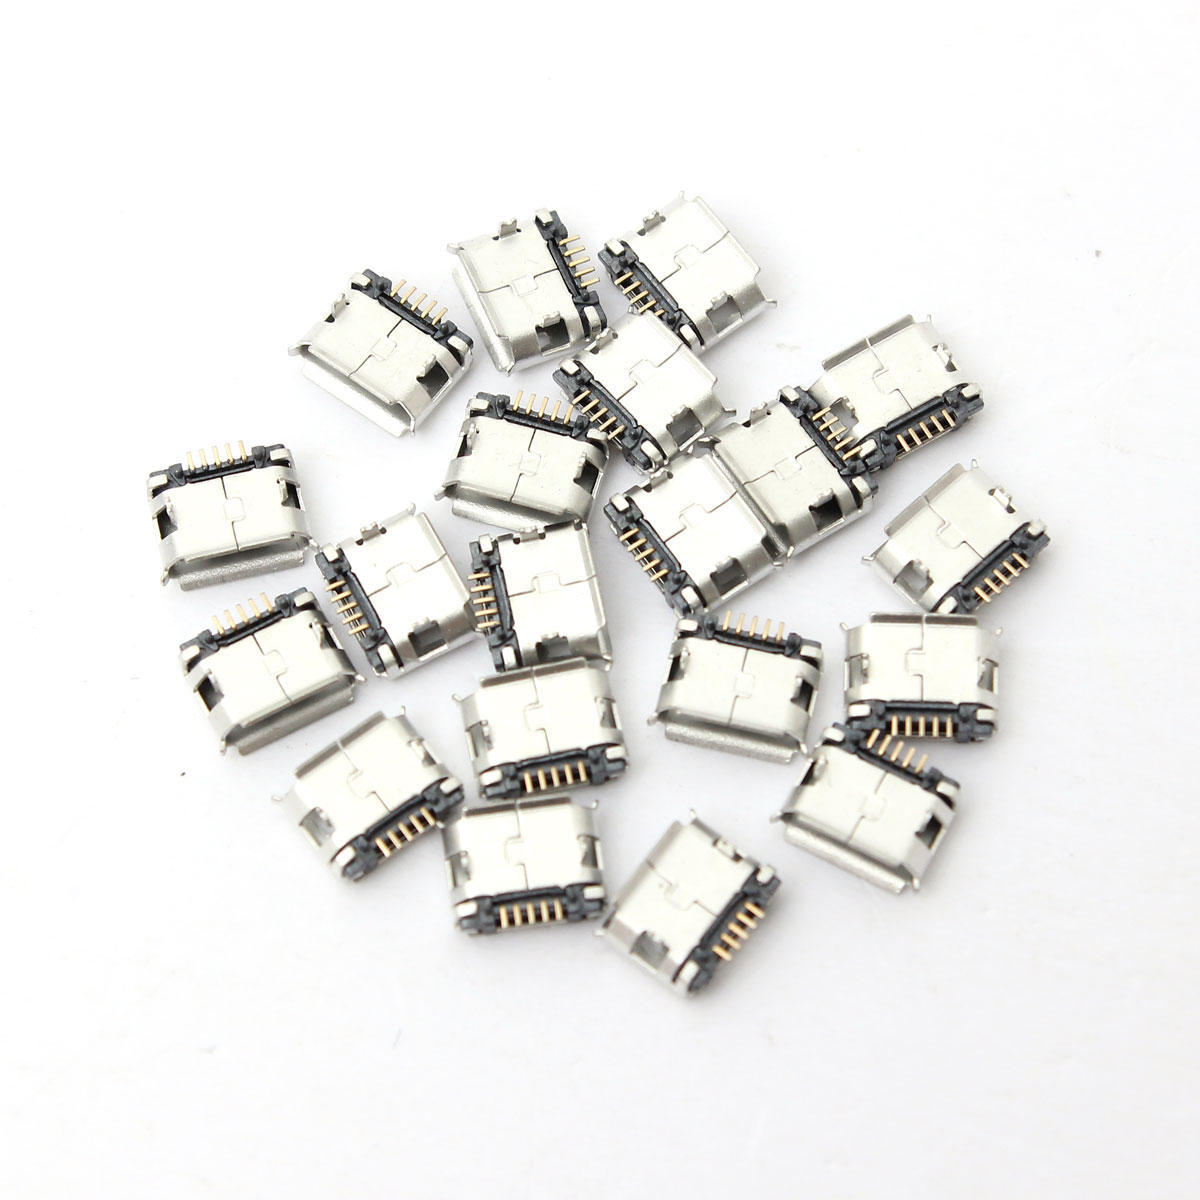 20 stks Micro USB Type B Vrouw Socket 5 Pin SMT SMD DIP Jack Connector Poort